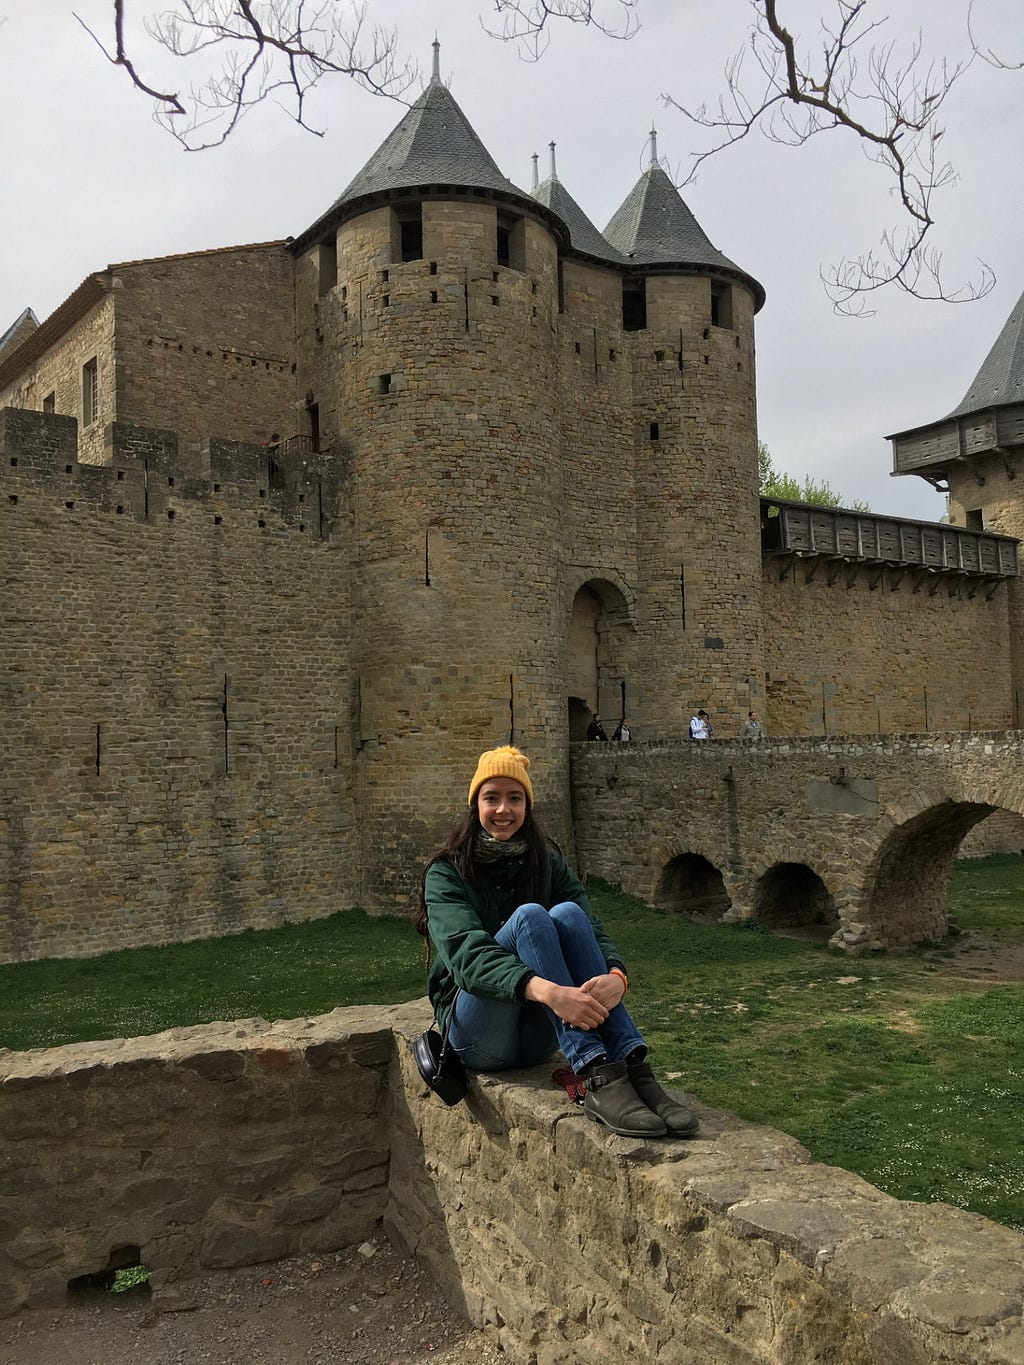 A trip to the medieval city of Carcassonne in France.